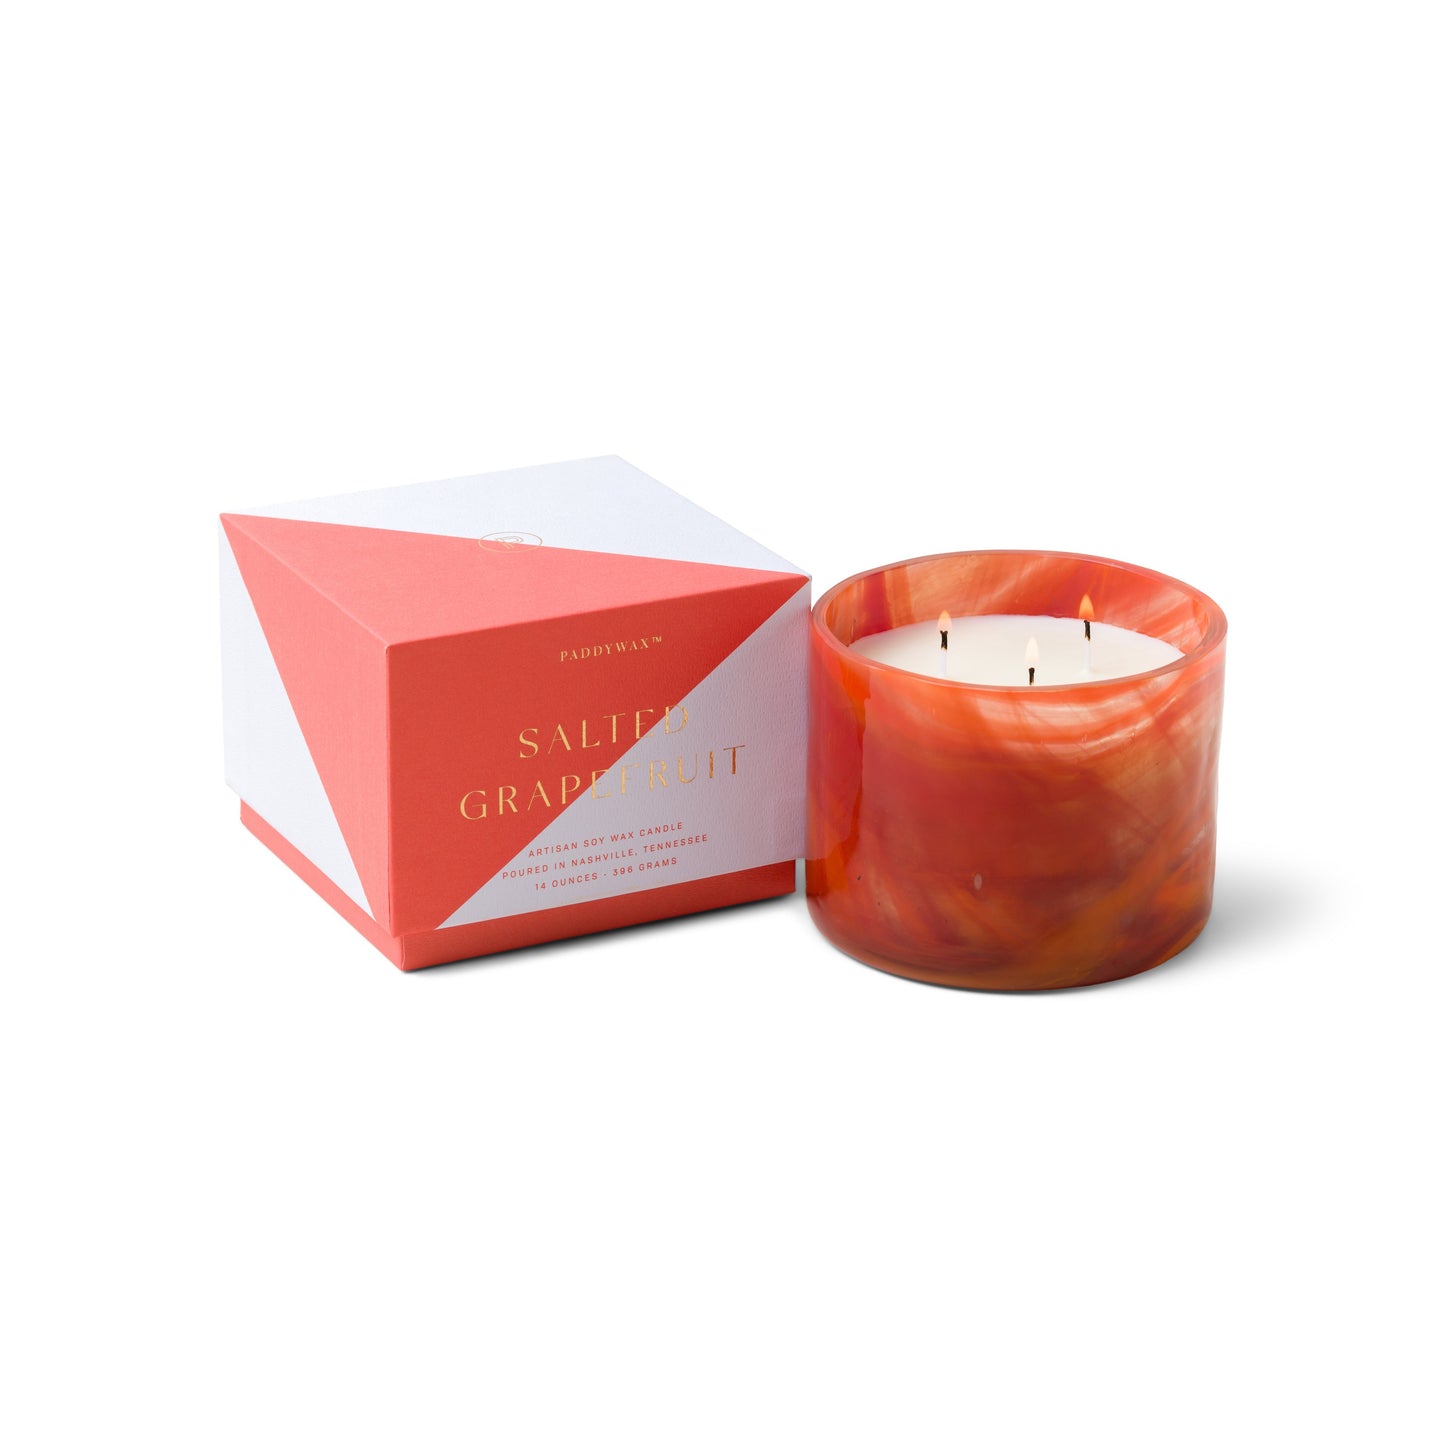 whirl 14 oz candle and box side by side salted grapefruit